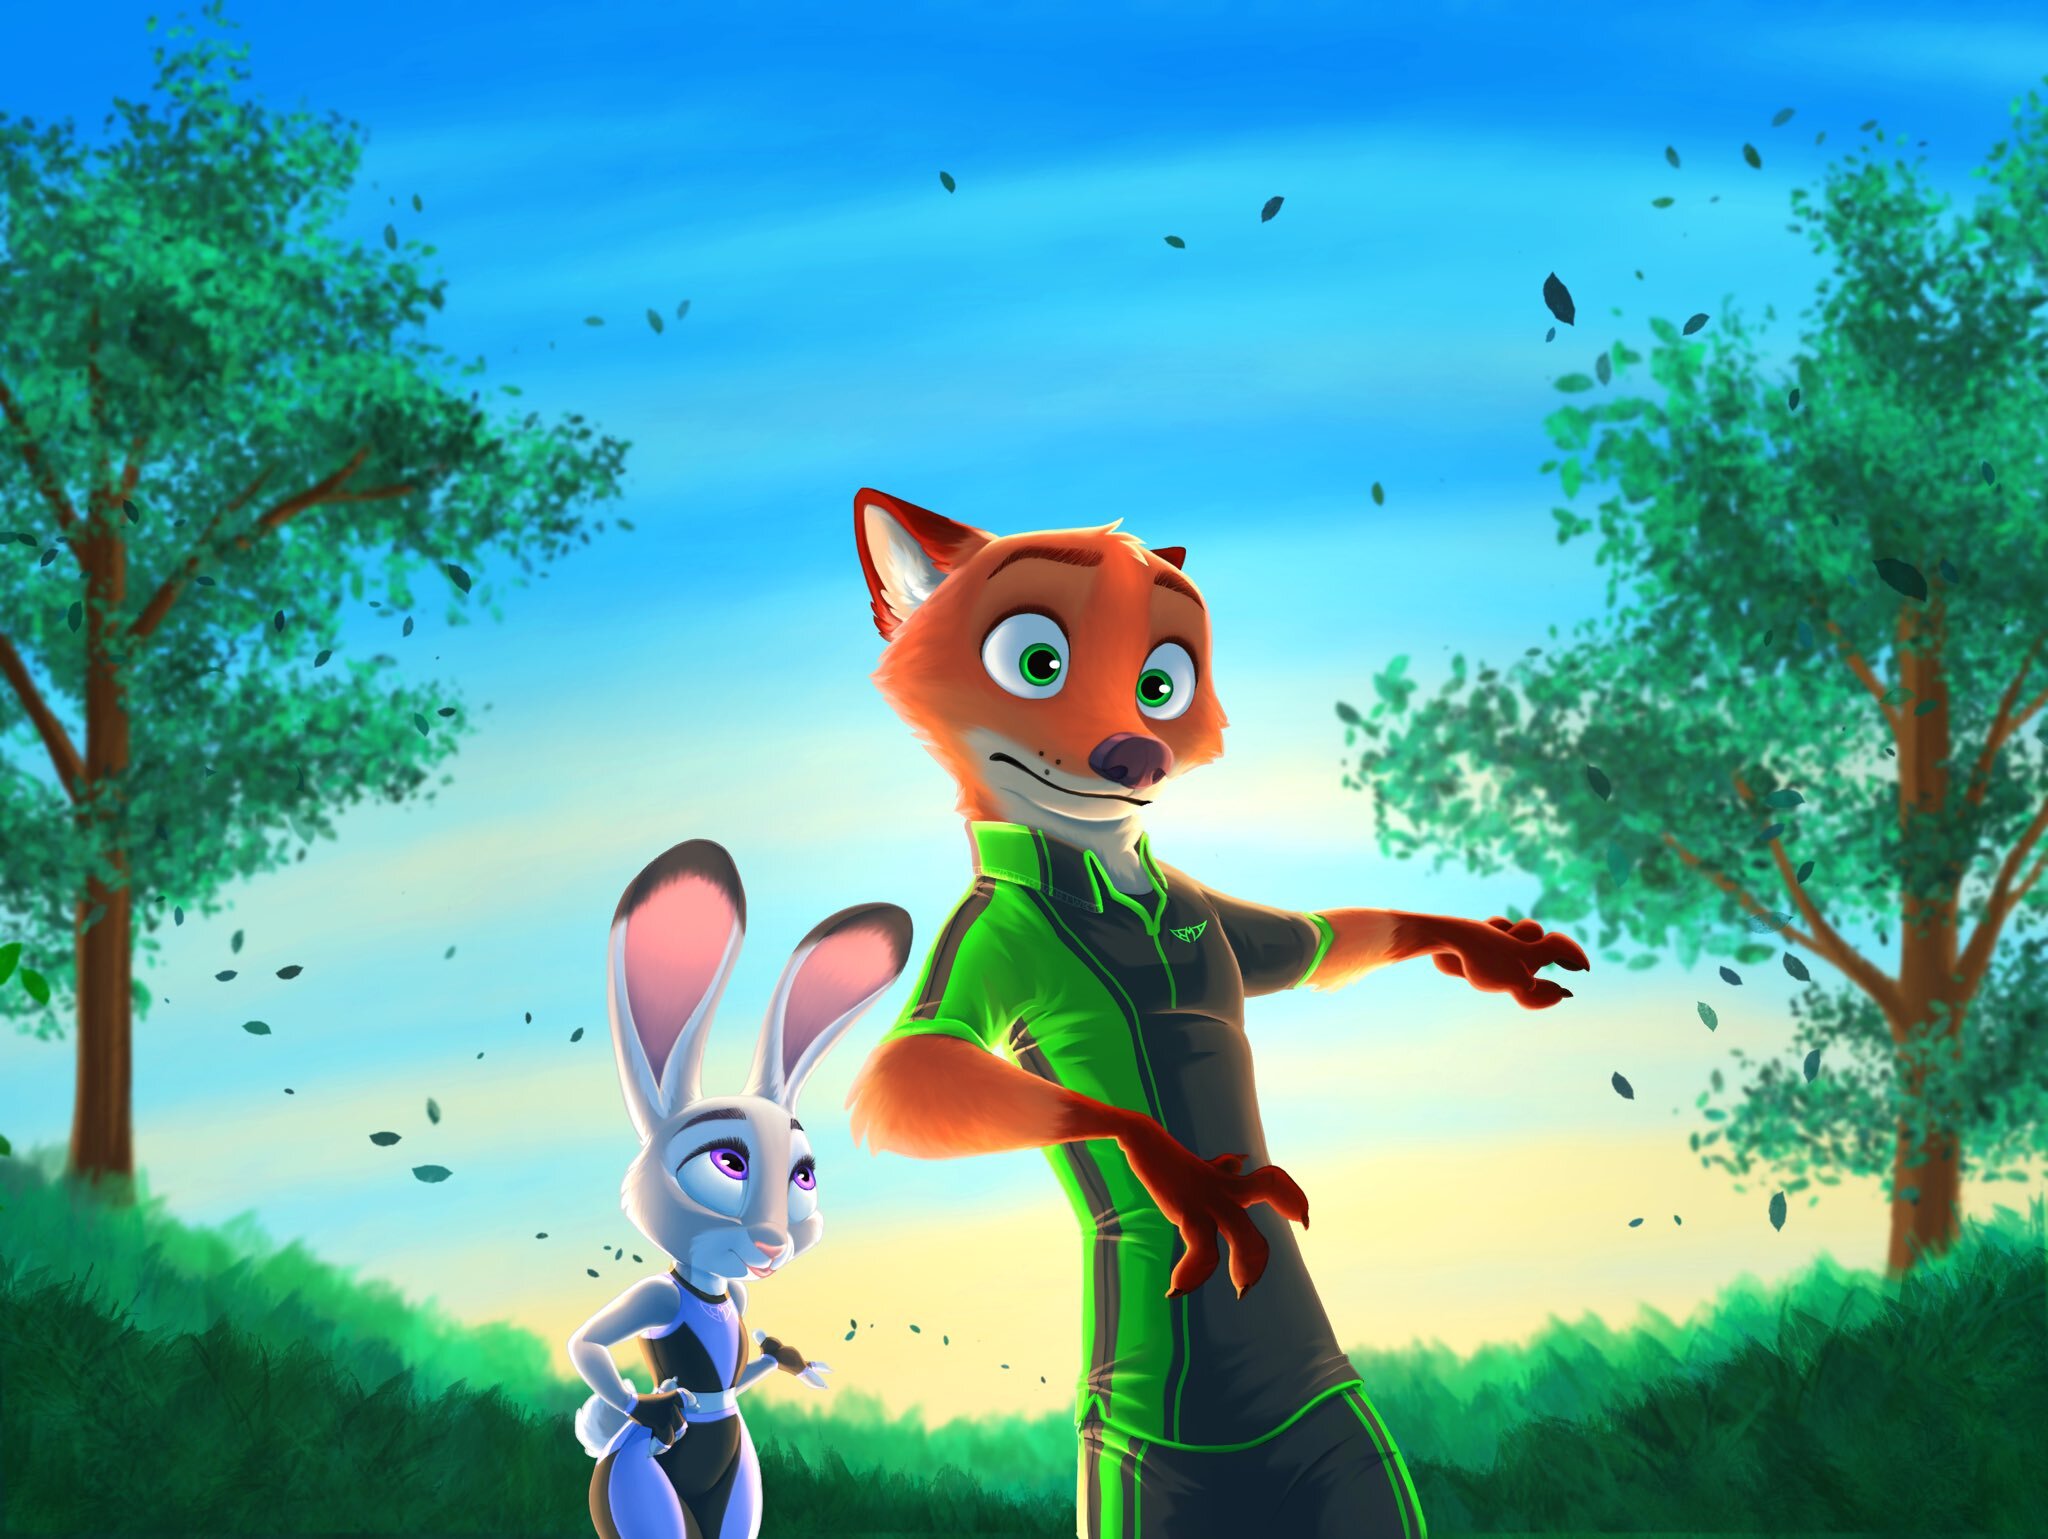 Continuation of the post When I thought that the training was over - Zootopia, Nick wilde, Judy hopps, Nick and Judy, Workout, Sketch, Art, Thewinterbunny, Reply to post